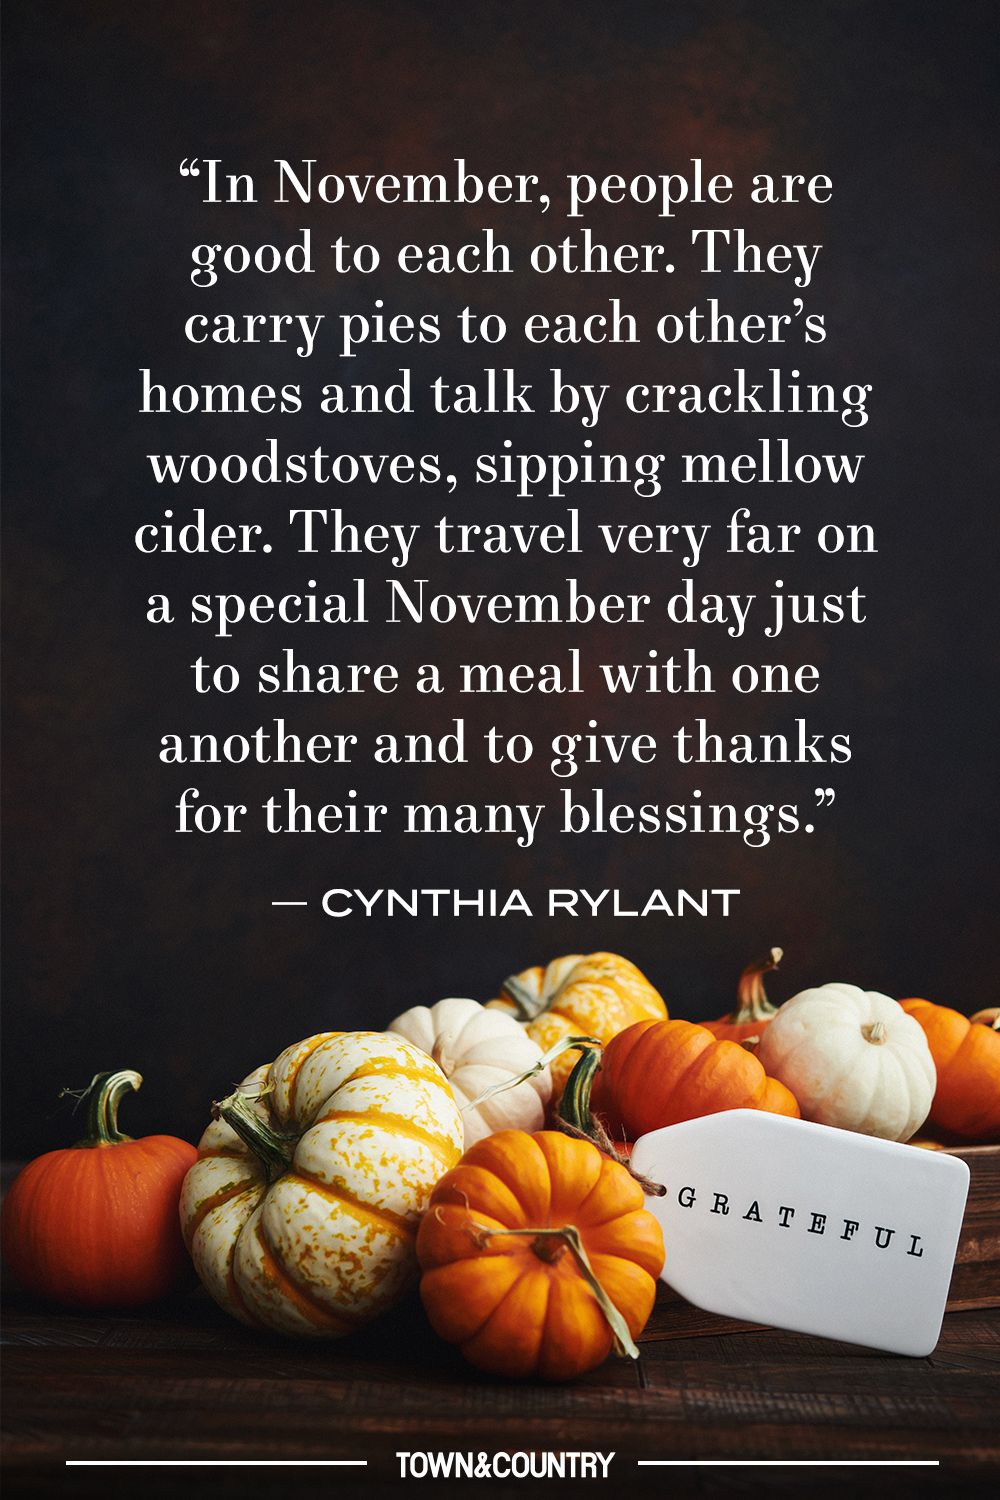 quotes about thankfulness